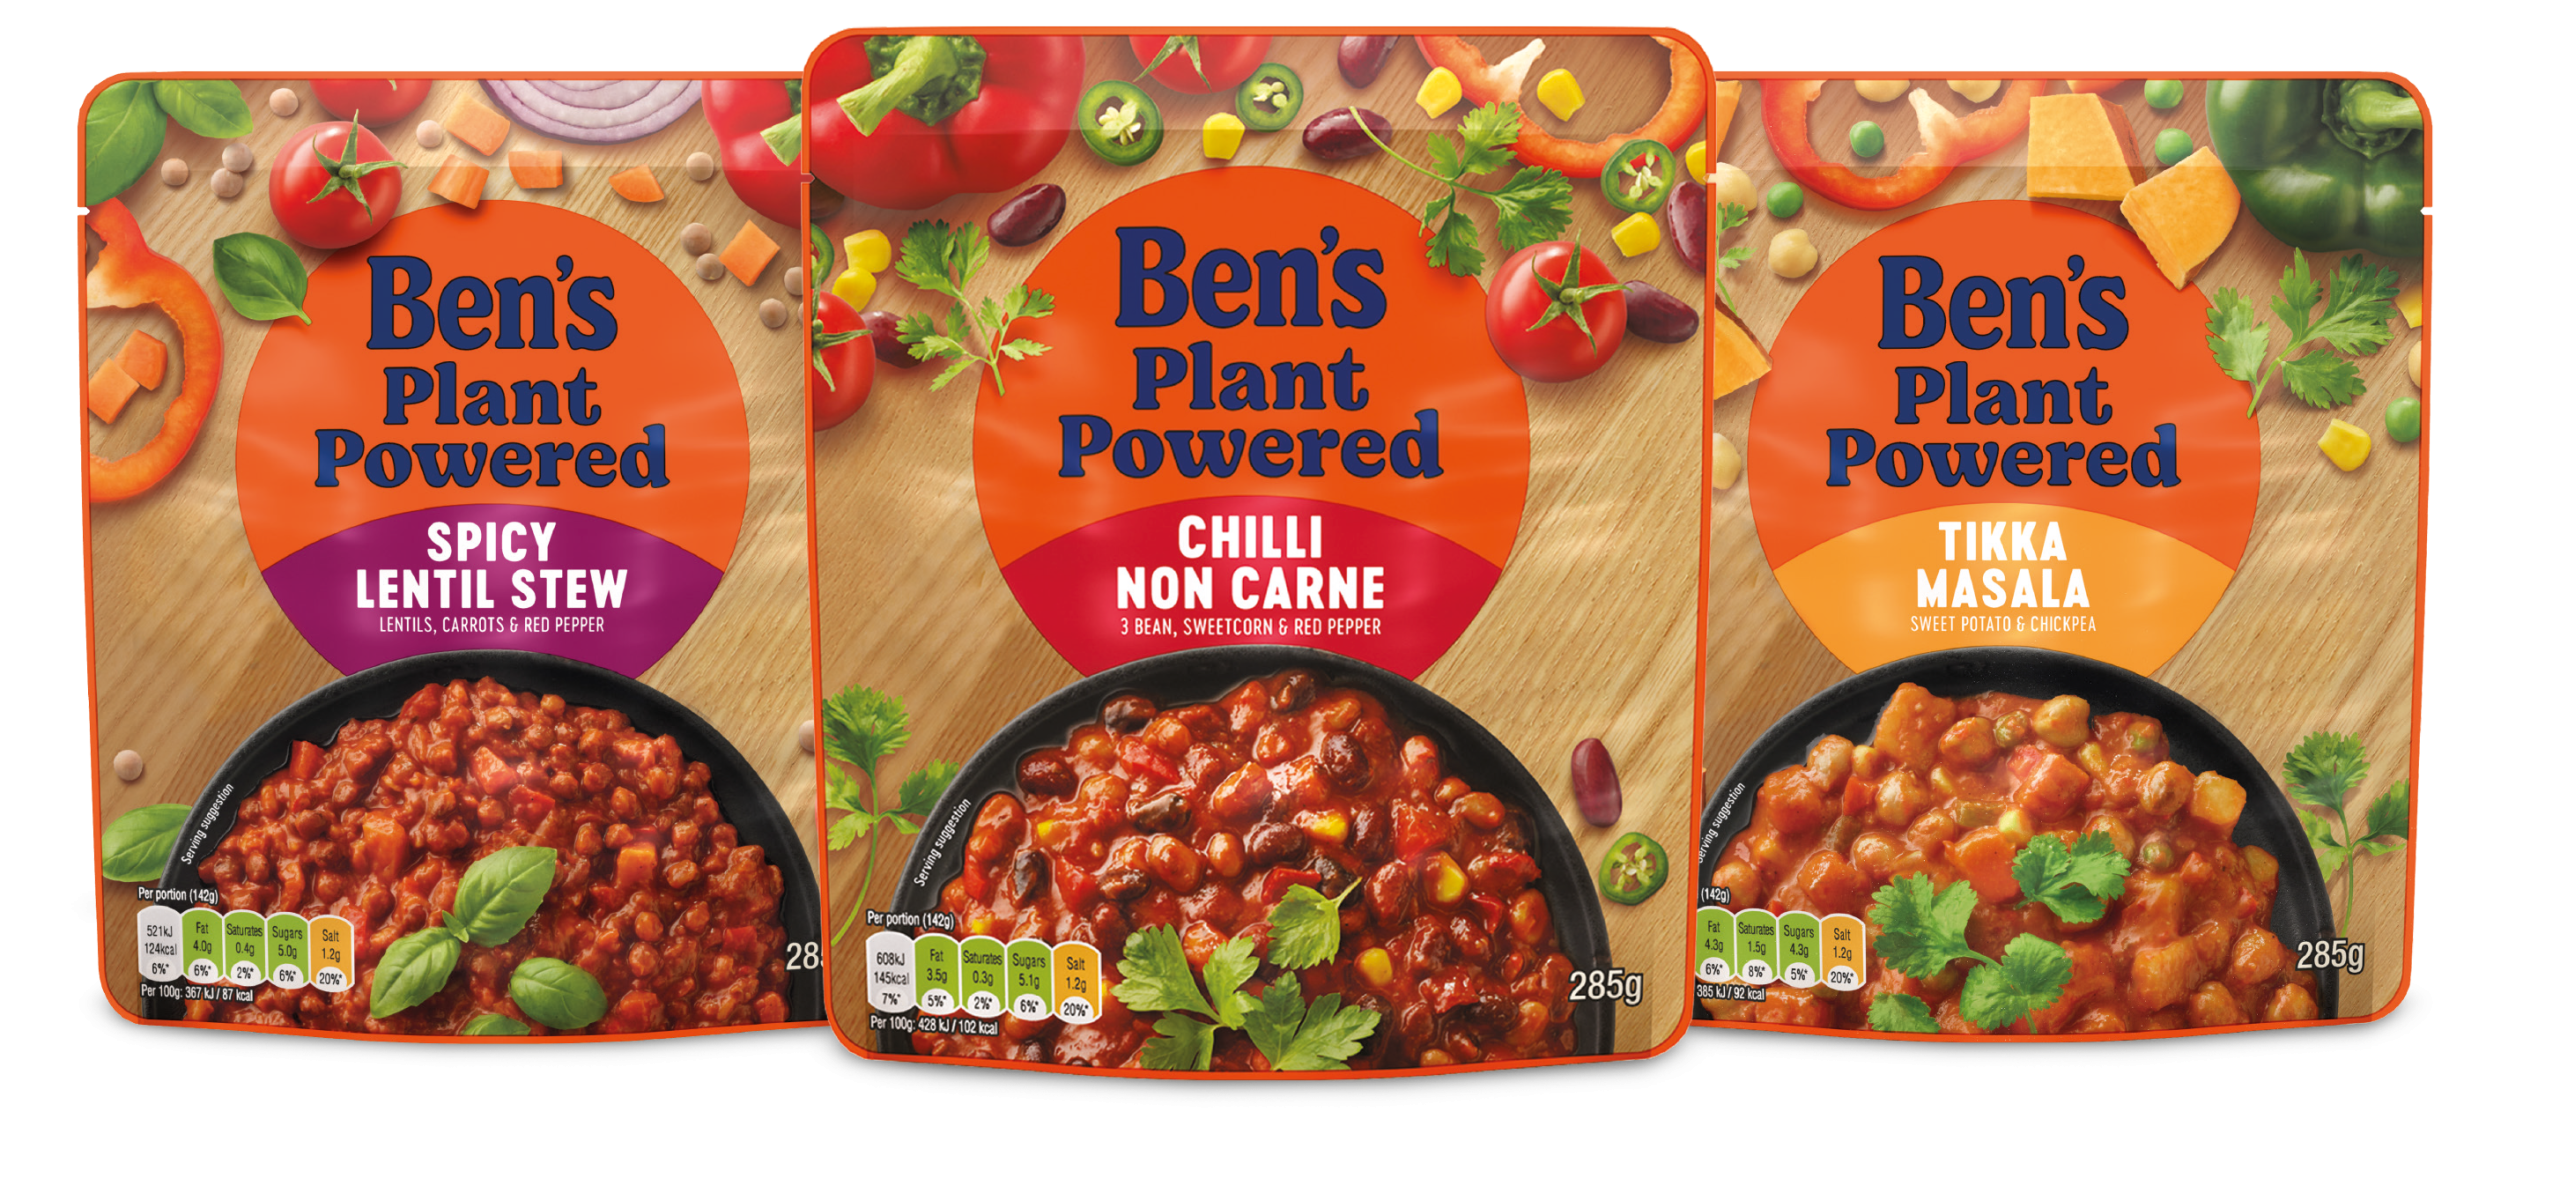 Spice up summer with New Ben’s Original rice